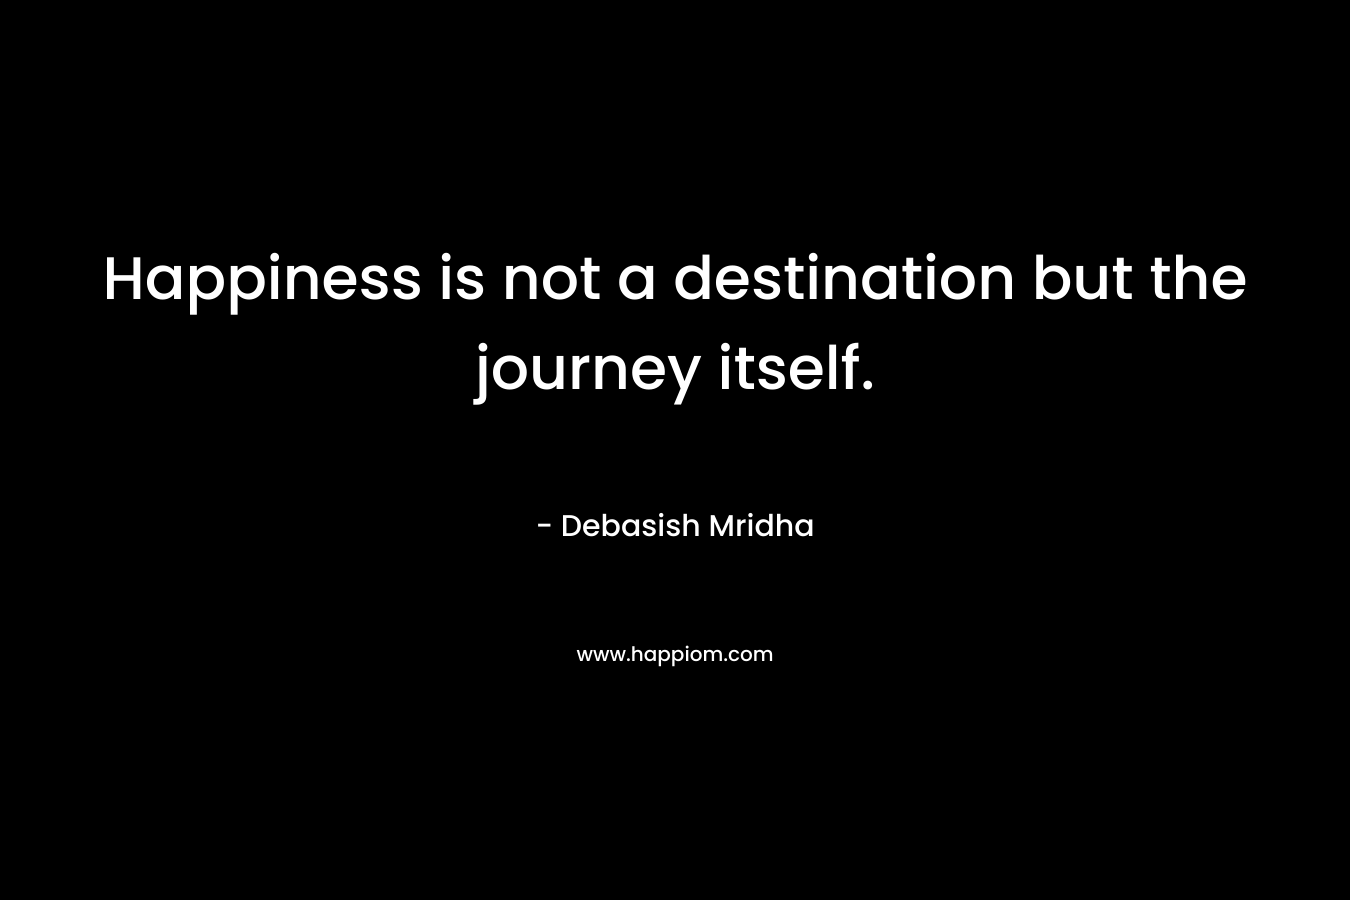 Happiness is not a destination but the journey itself.